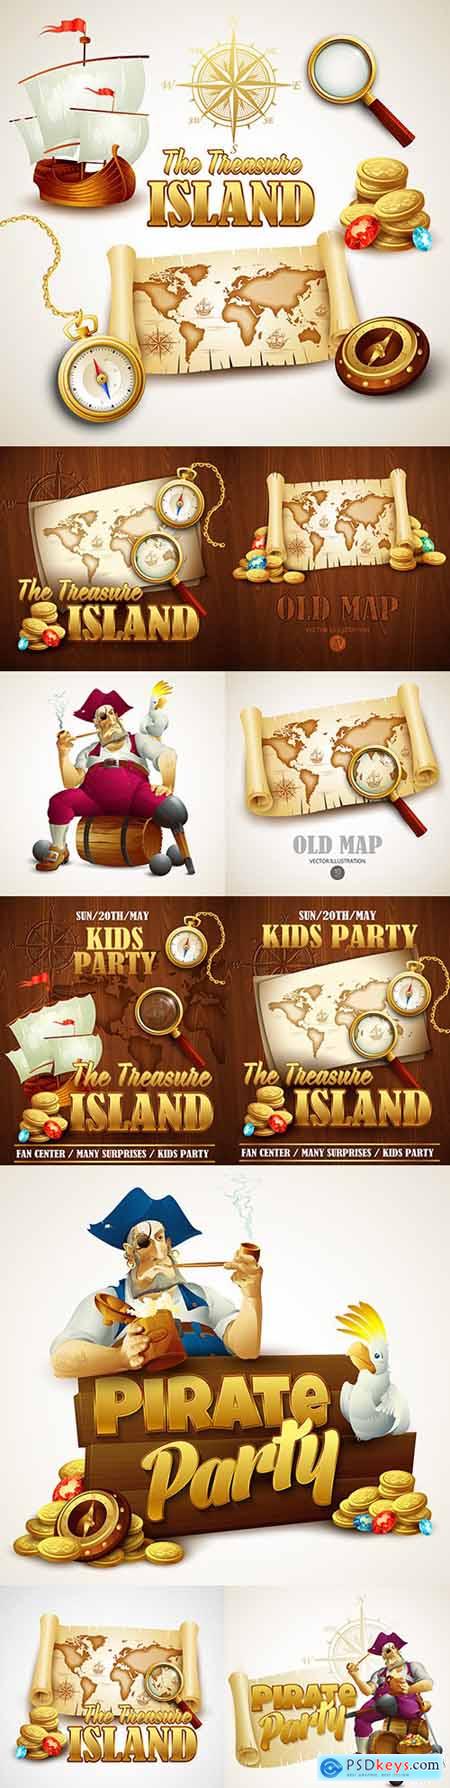 Treasure Island map and pirate party poster template